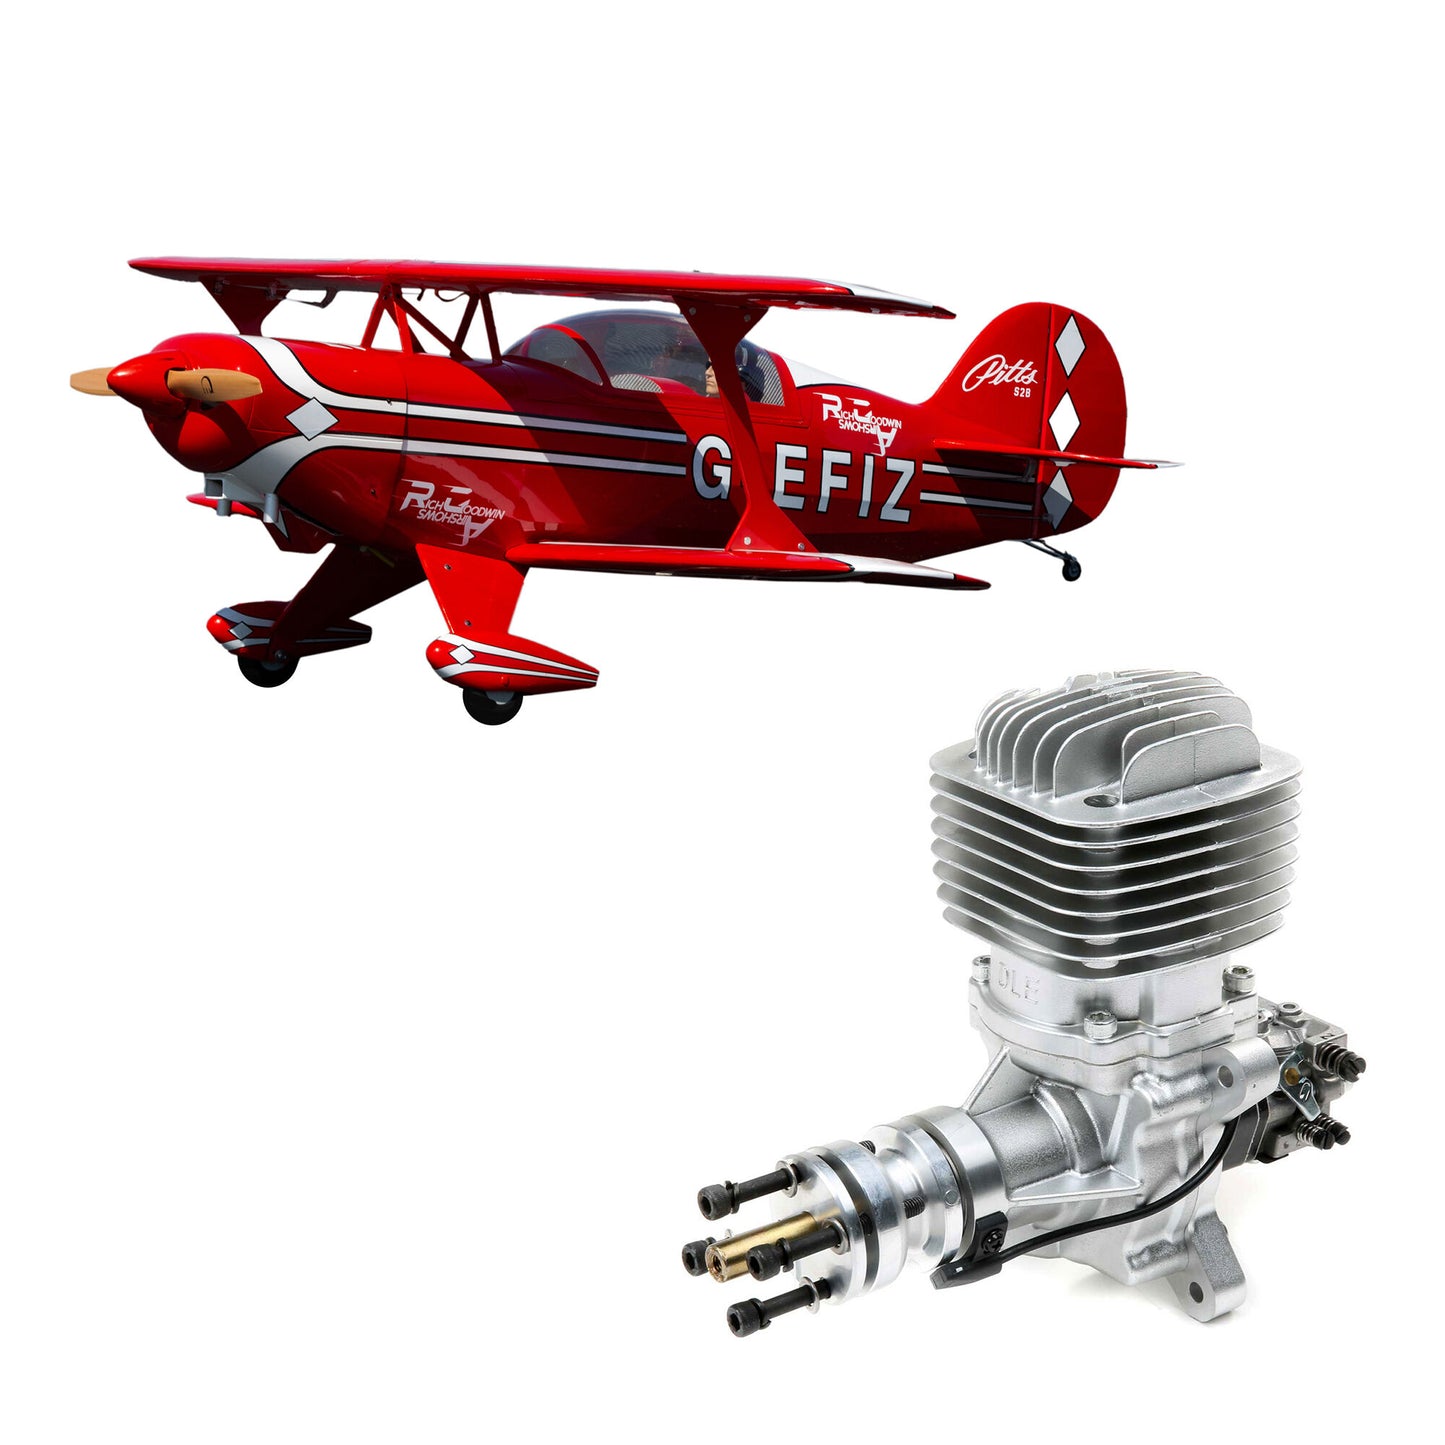 Pitts S-2B 50-60cc  71.6" with DLE 61cc Gas Engine